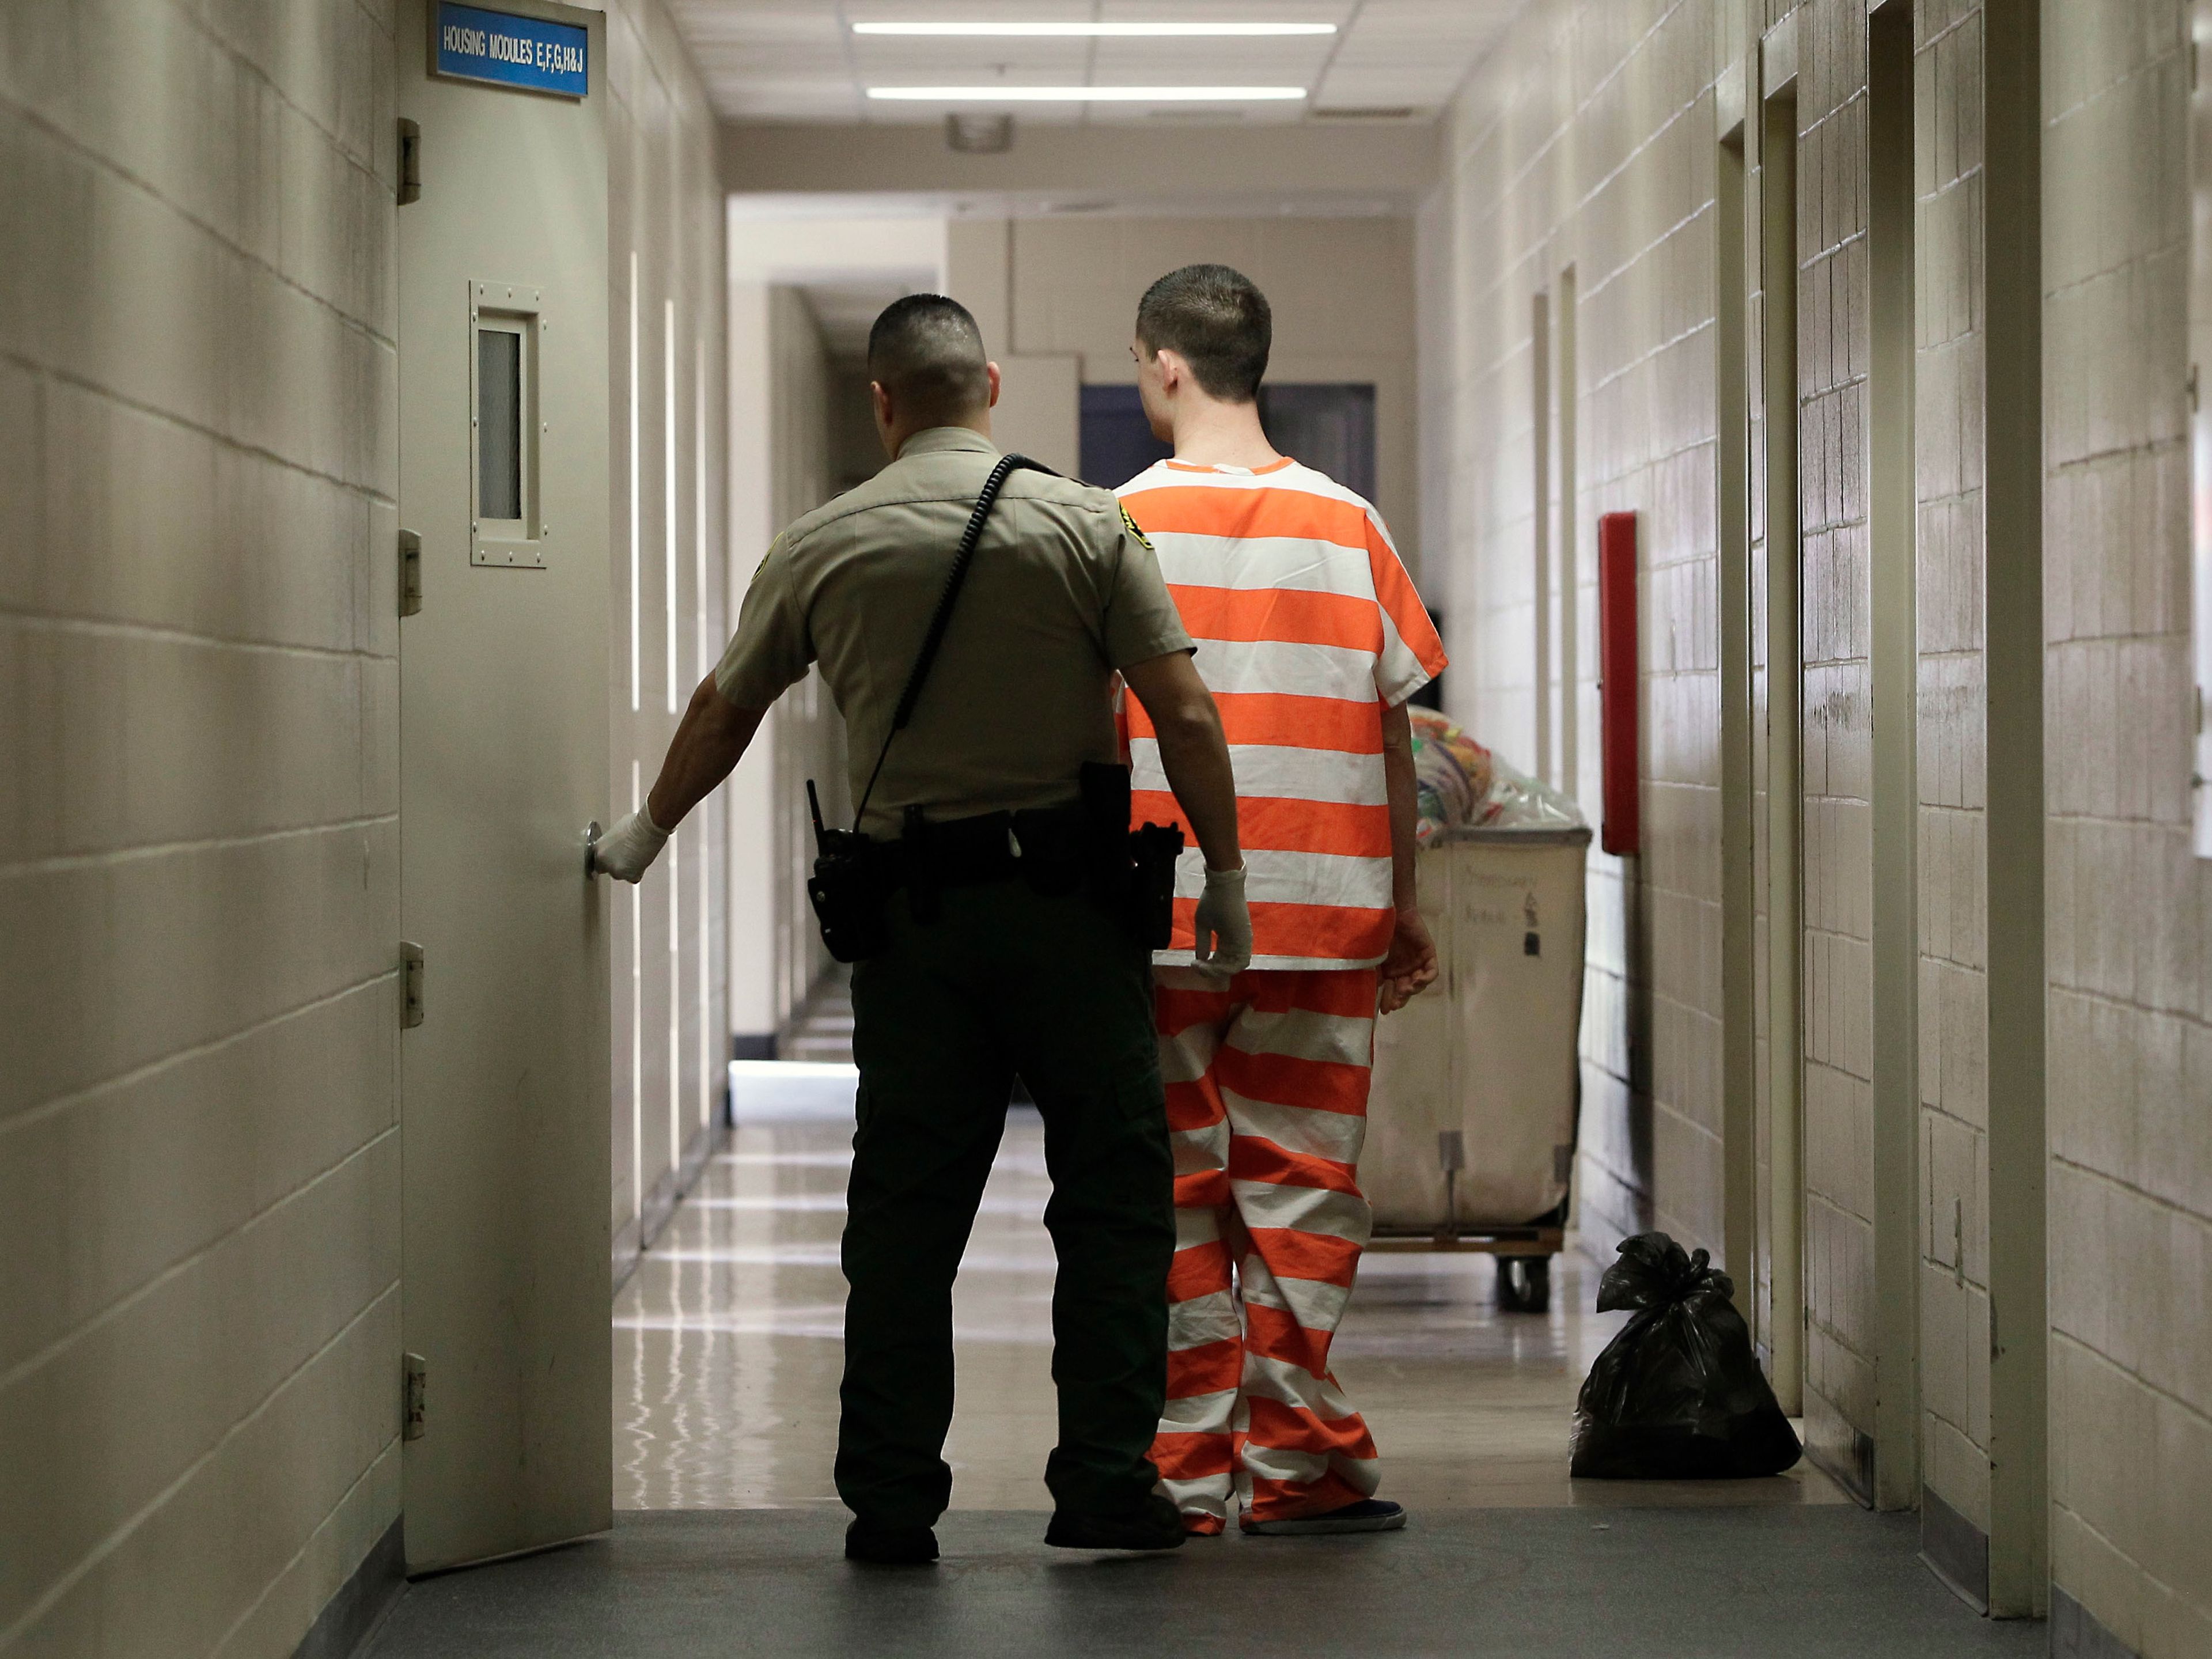 In This Thursday, Feb. 21, 2013 Photo, A Prison Inmate Is Brought Into An Inmate Housing Unit In Madera, Calif. 